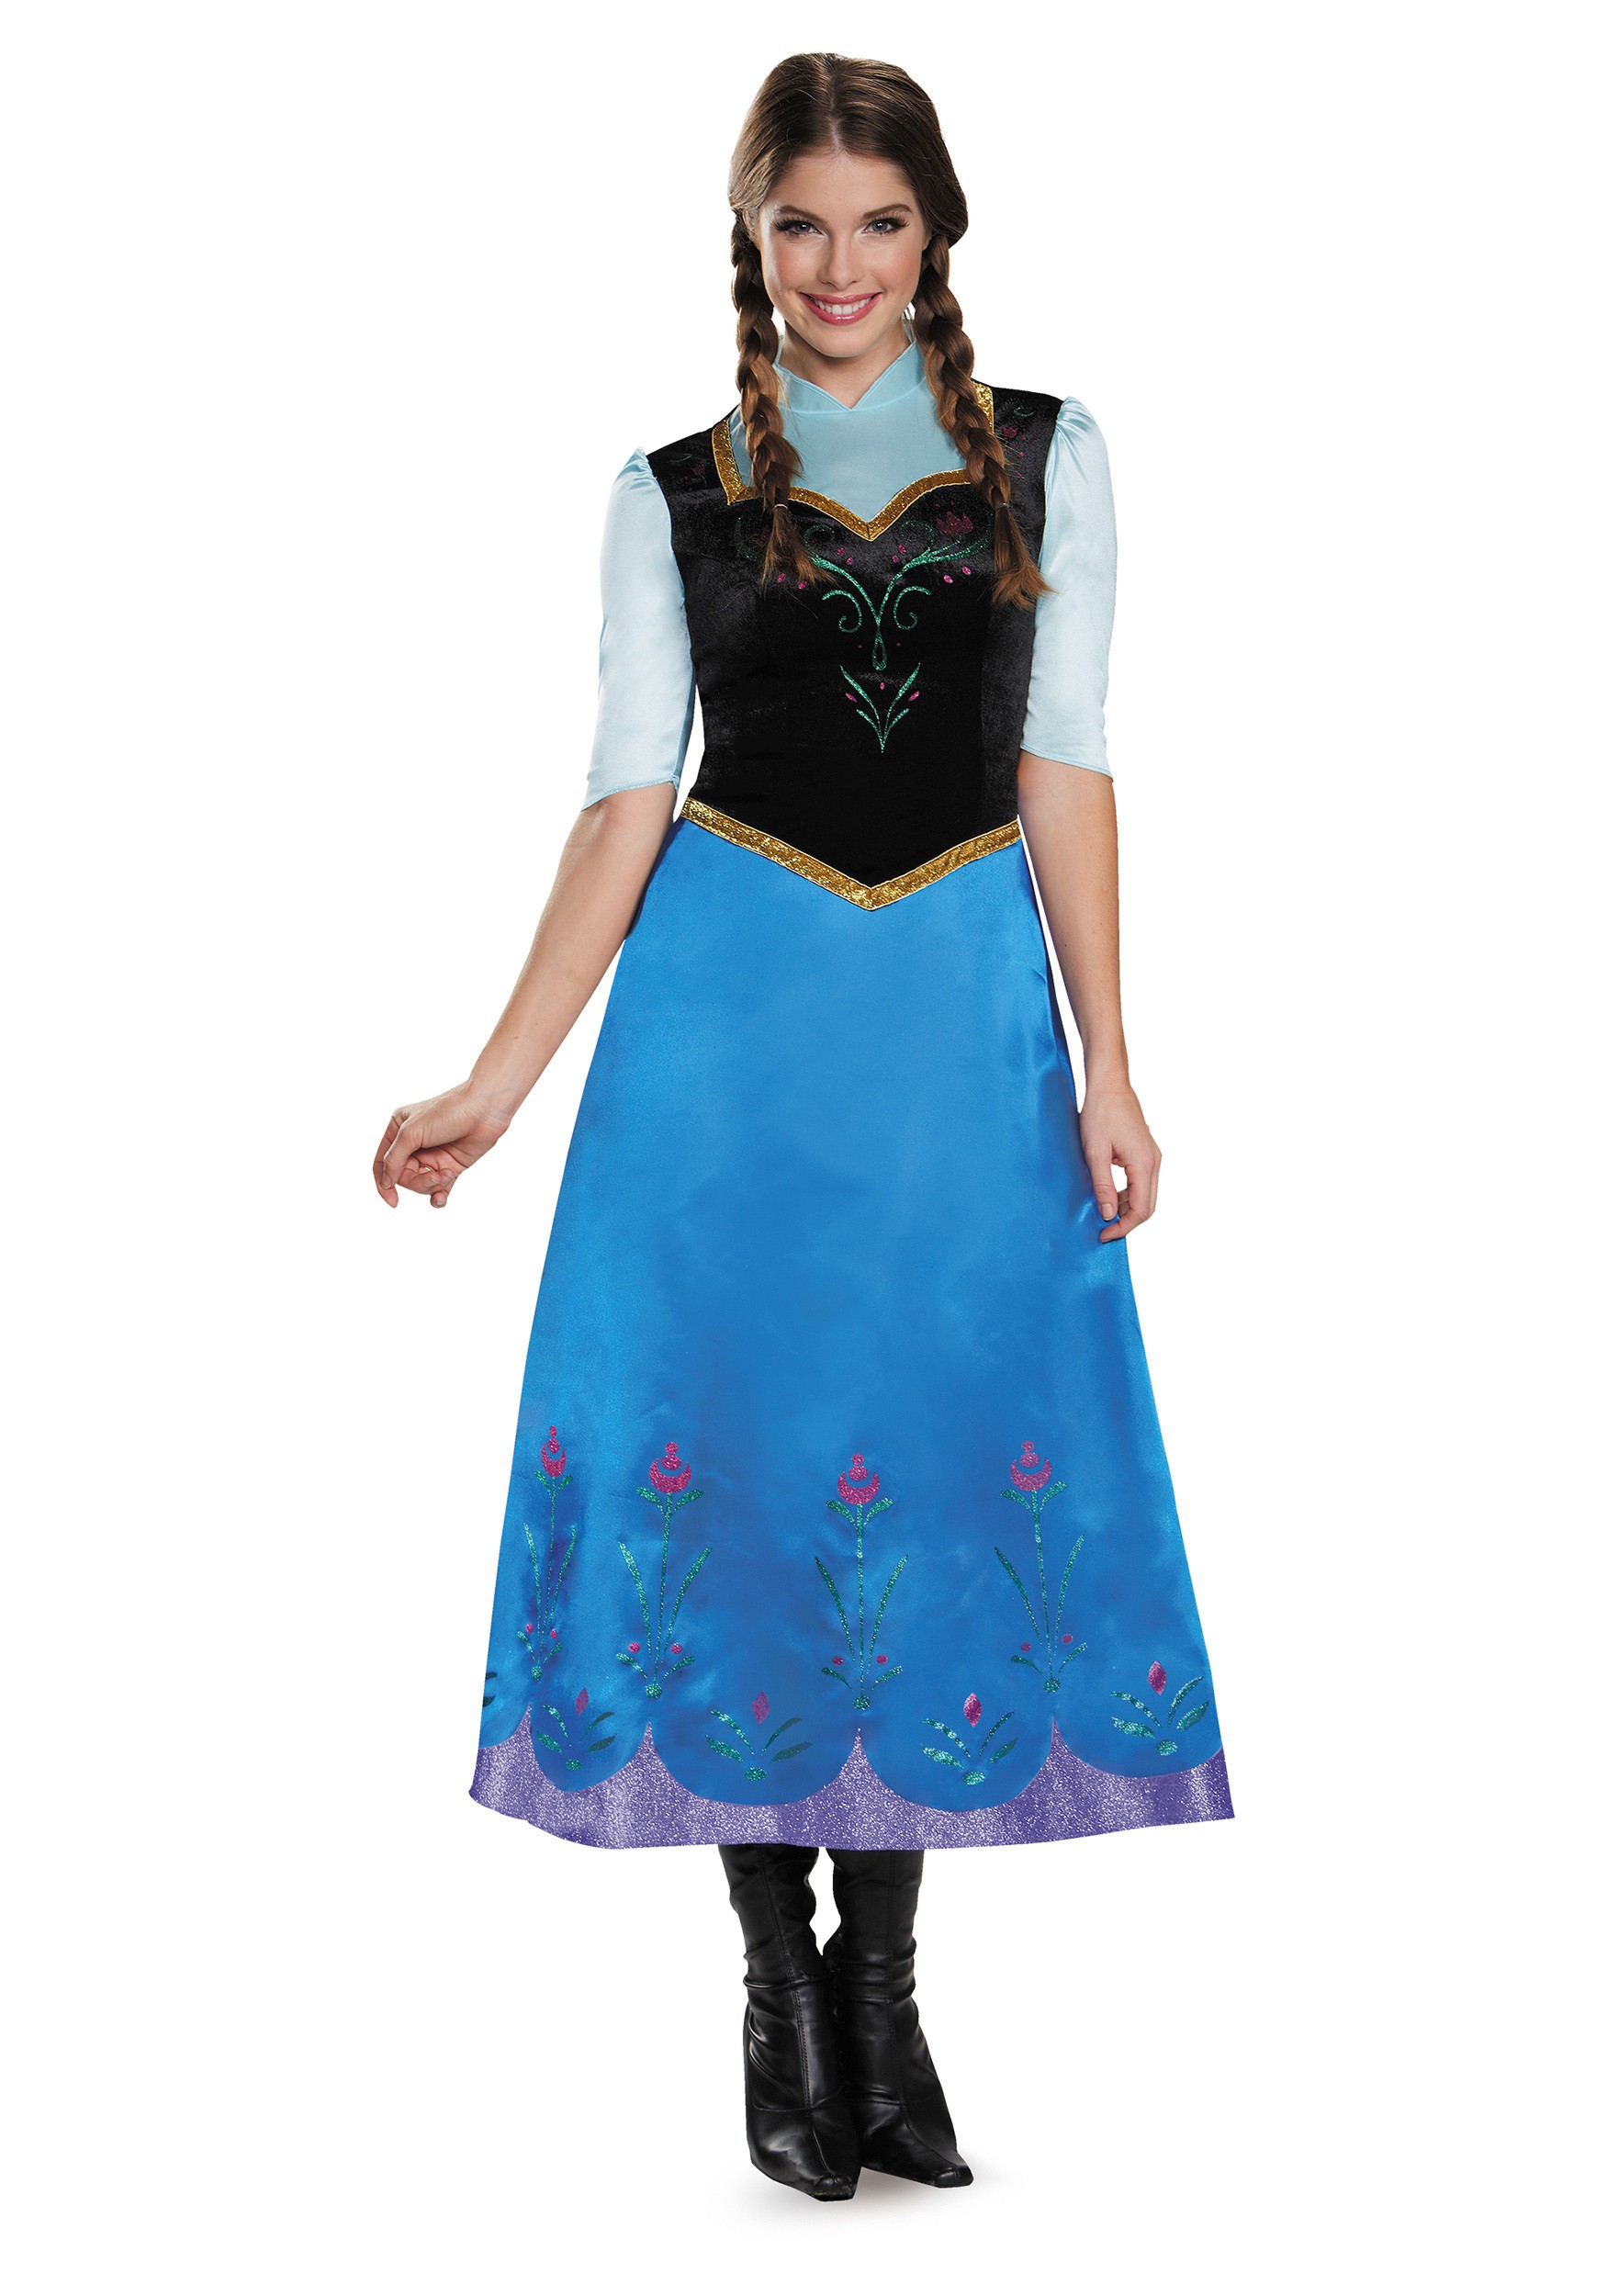 pictures of anna from frozen dress